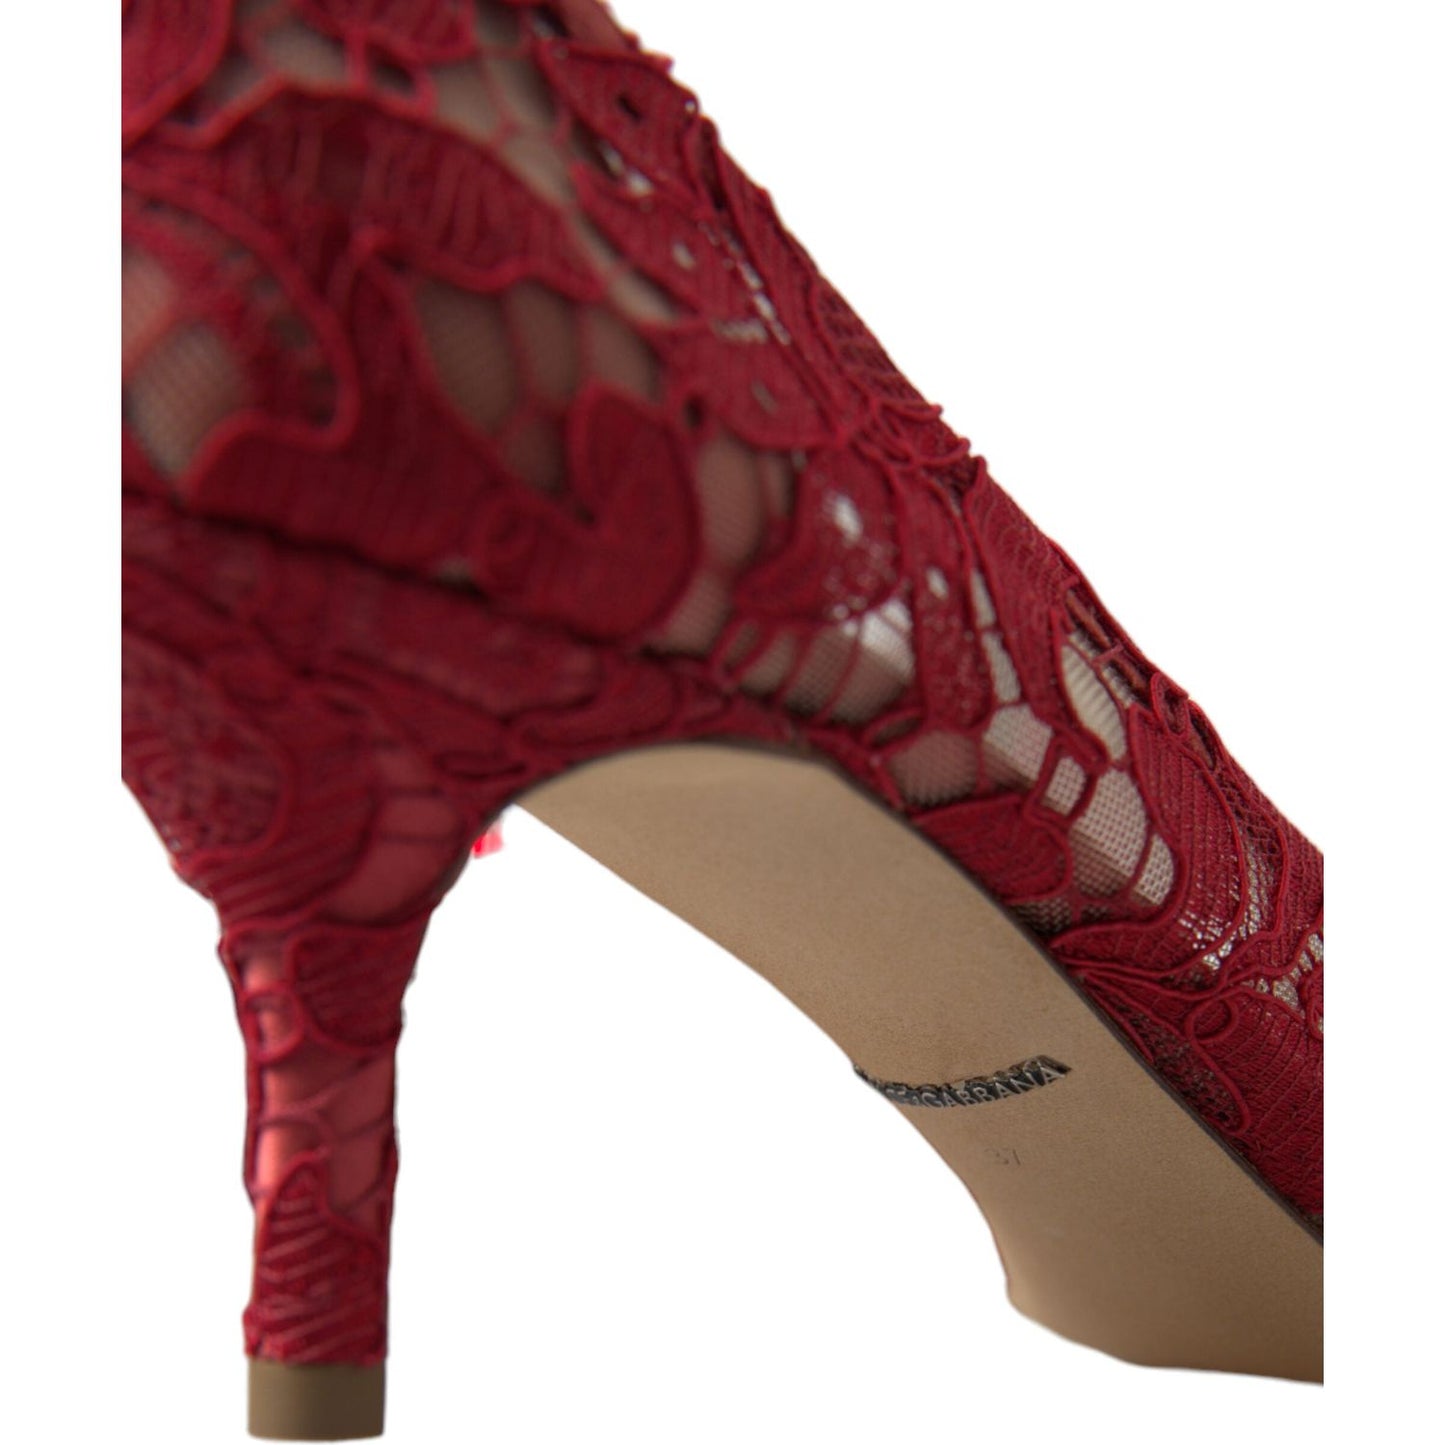 Dolce & Gabbana Radiant Red Lace Heels with Crystals red-taormina-lace-crystal-heels-pumps-shoes-2 465A9602-bg-scaled-df66ae90-01f.jpg